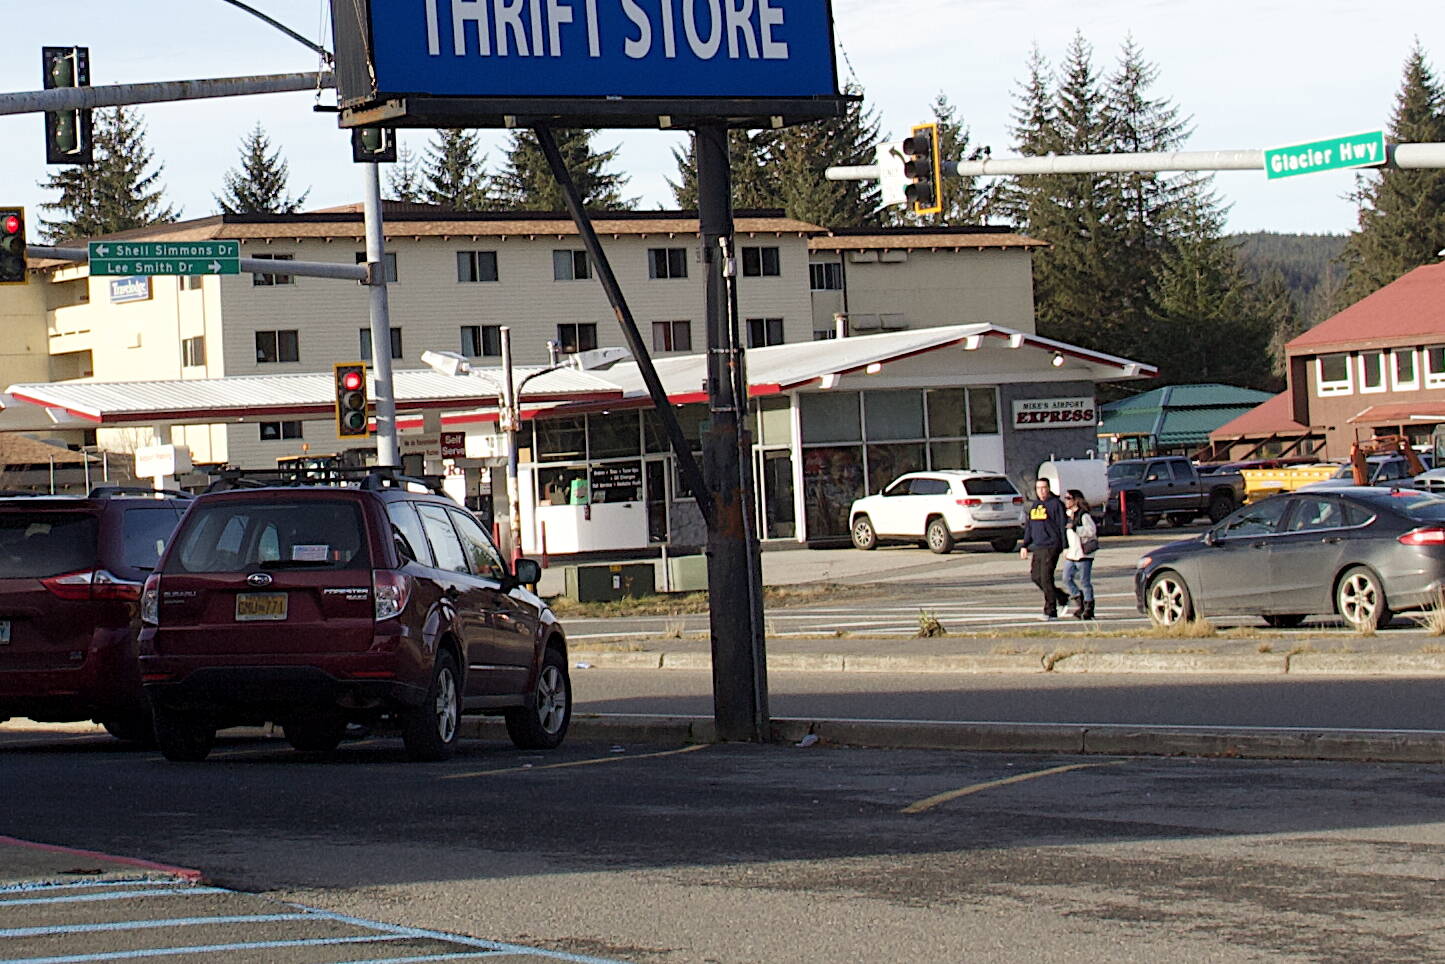 The intersection of Glacier Highway and Shell Simmons Drive, seen here at midday Thursday, is where a hit-and-run accident that resulted in life-threatening injuries to a pedestrian struck by a vehicle occurred Thursday night, according to the Juneau Police Department. (Meredith Jordan / Juneau Empire File)